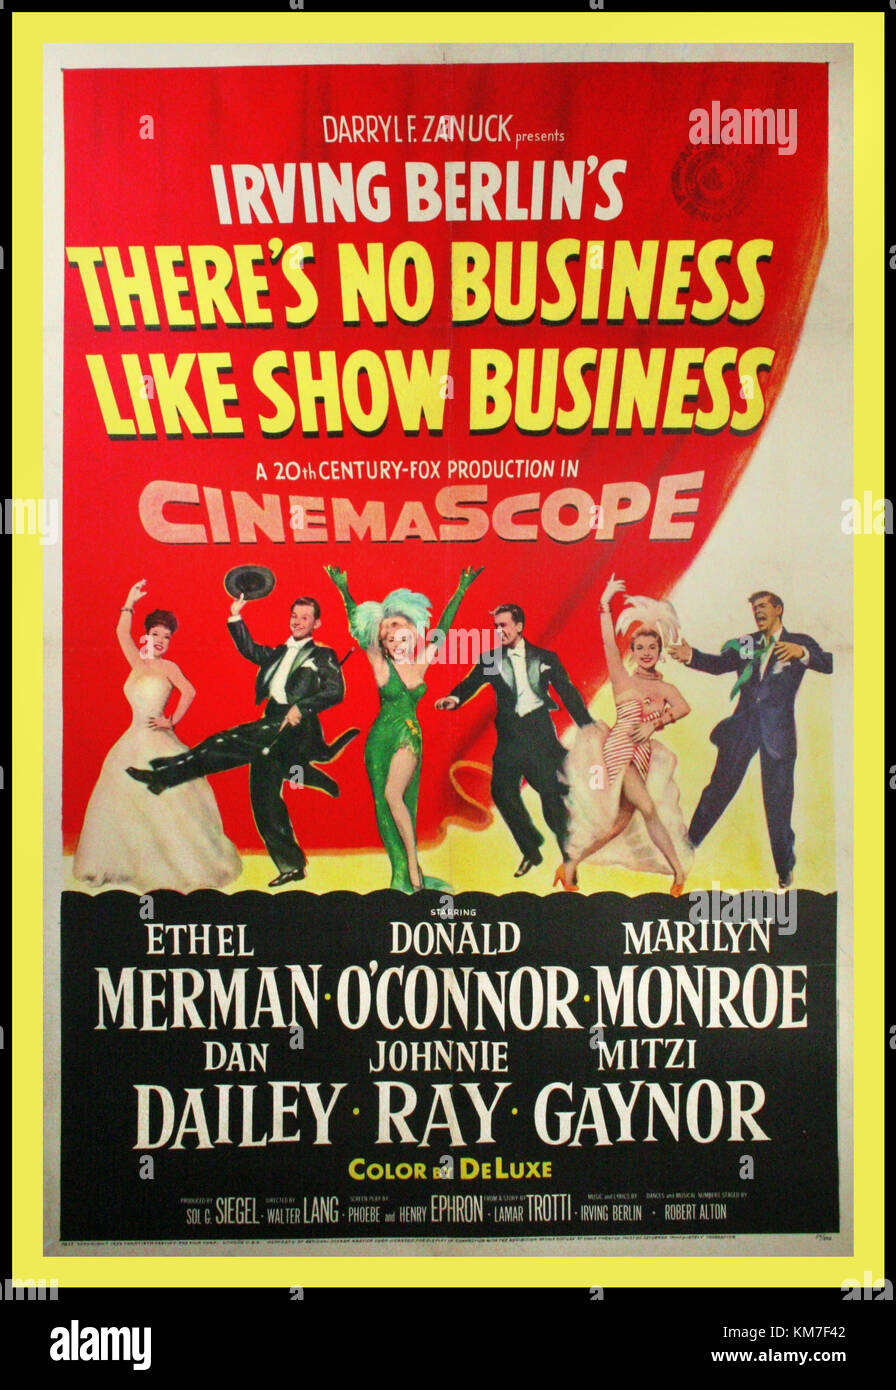 Vintage Musical Movie Film Poster THERE’S NO BUSINESS LIKE SHOW BUSINESS, 1954. starring Ether Merman, Marilyn Monroe, Donald O’Connor, Johnnie Ray, Dan Dailey, Mitzi Gaynor, director Walter Lang. Irving Berlin Musical vintage entertainment poster Stock Photo